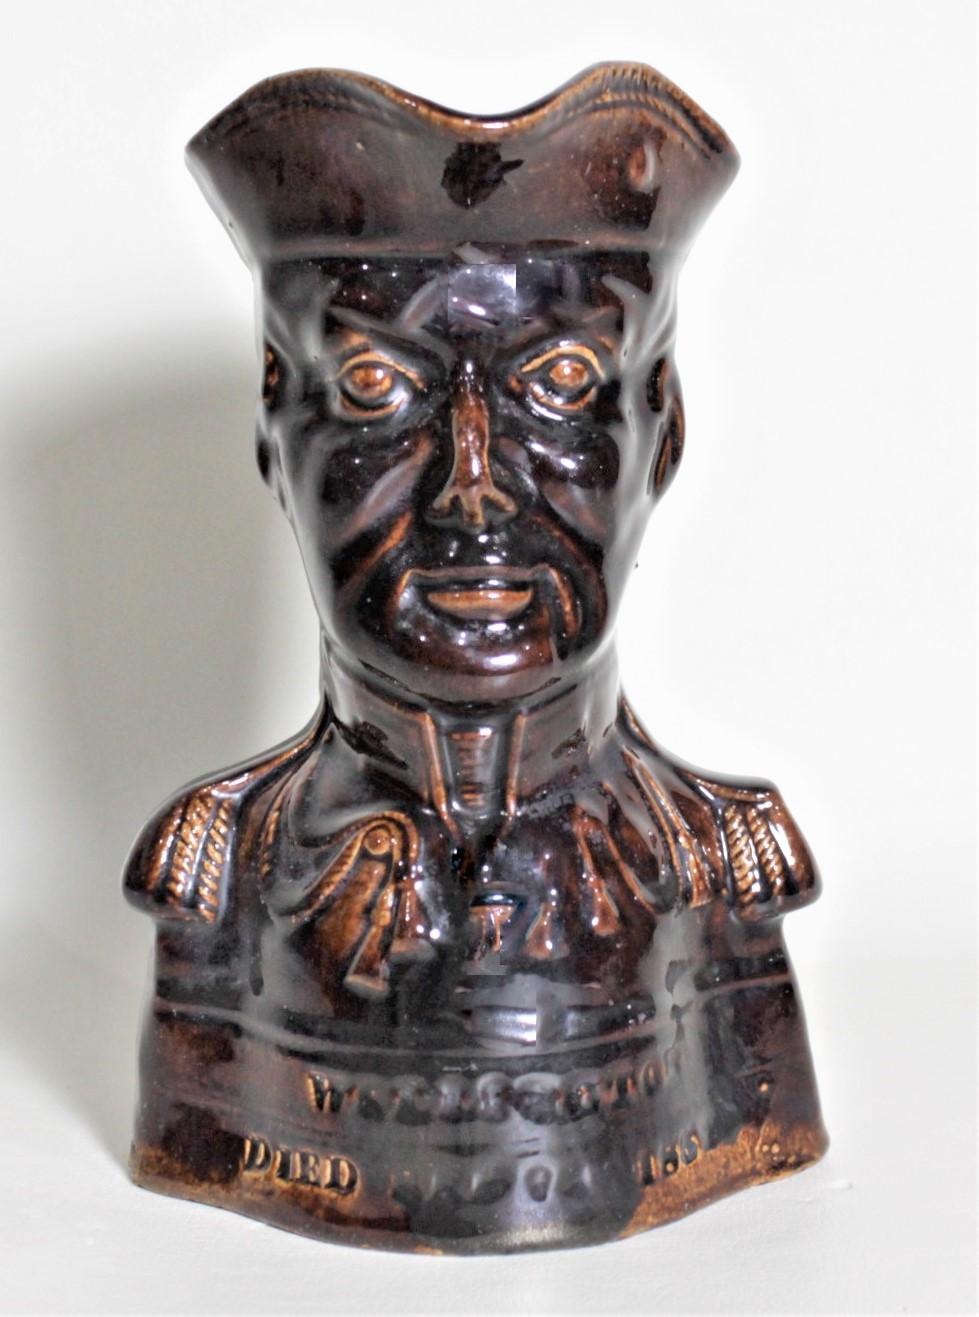 This antique character or toby jug is unmarked, but being attributed to the Rockingham Pottery Company of England and presumed to have been made in circa 1852. The jug commemorates the life of Lord Wellington and is done with a C. Treacle glazed